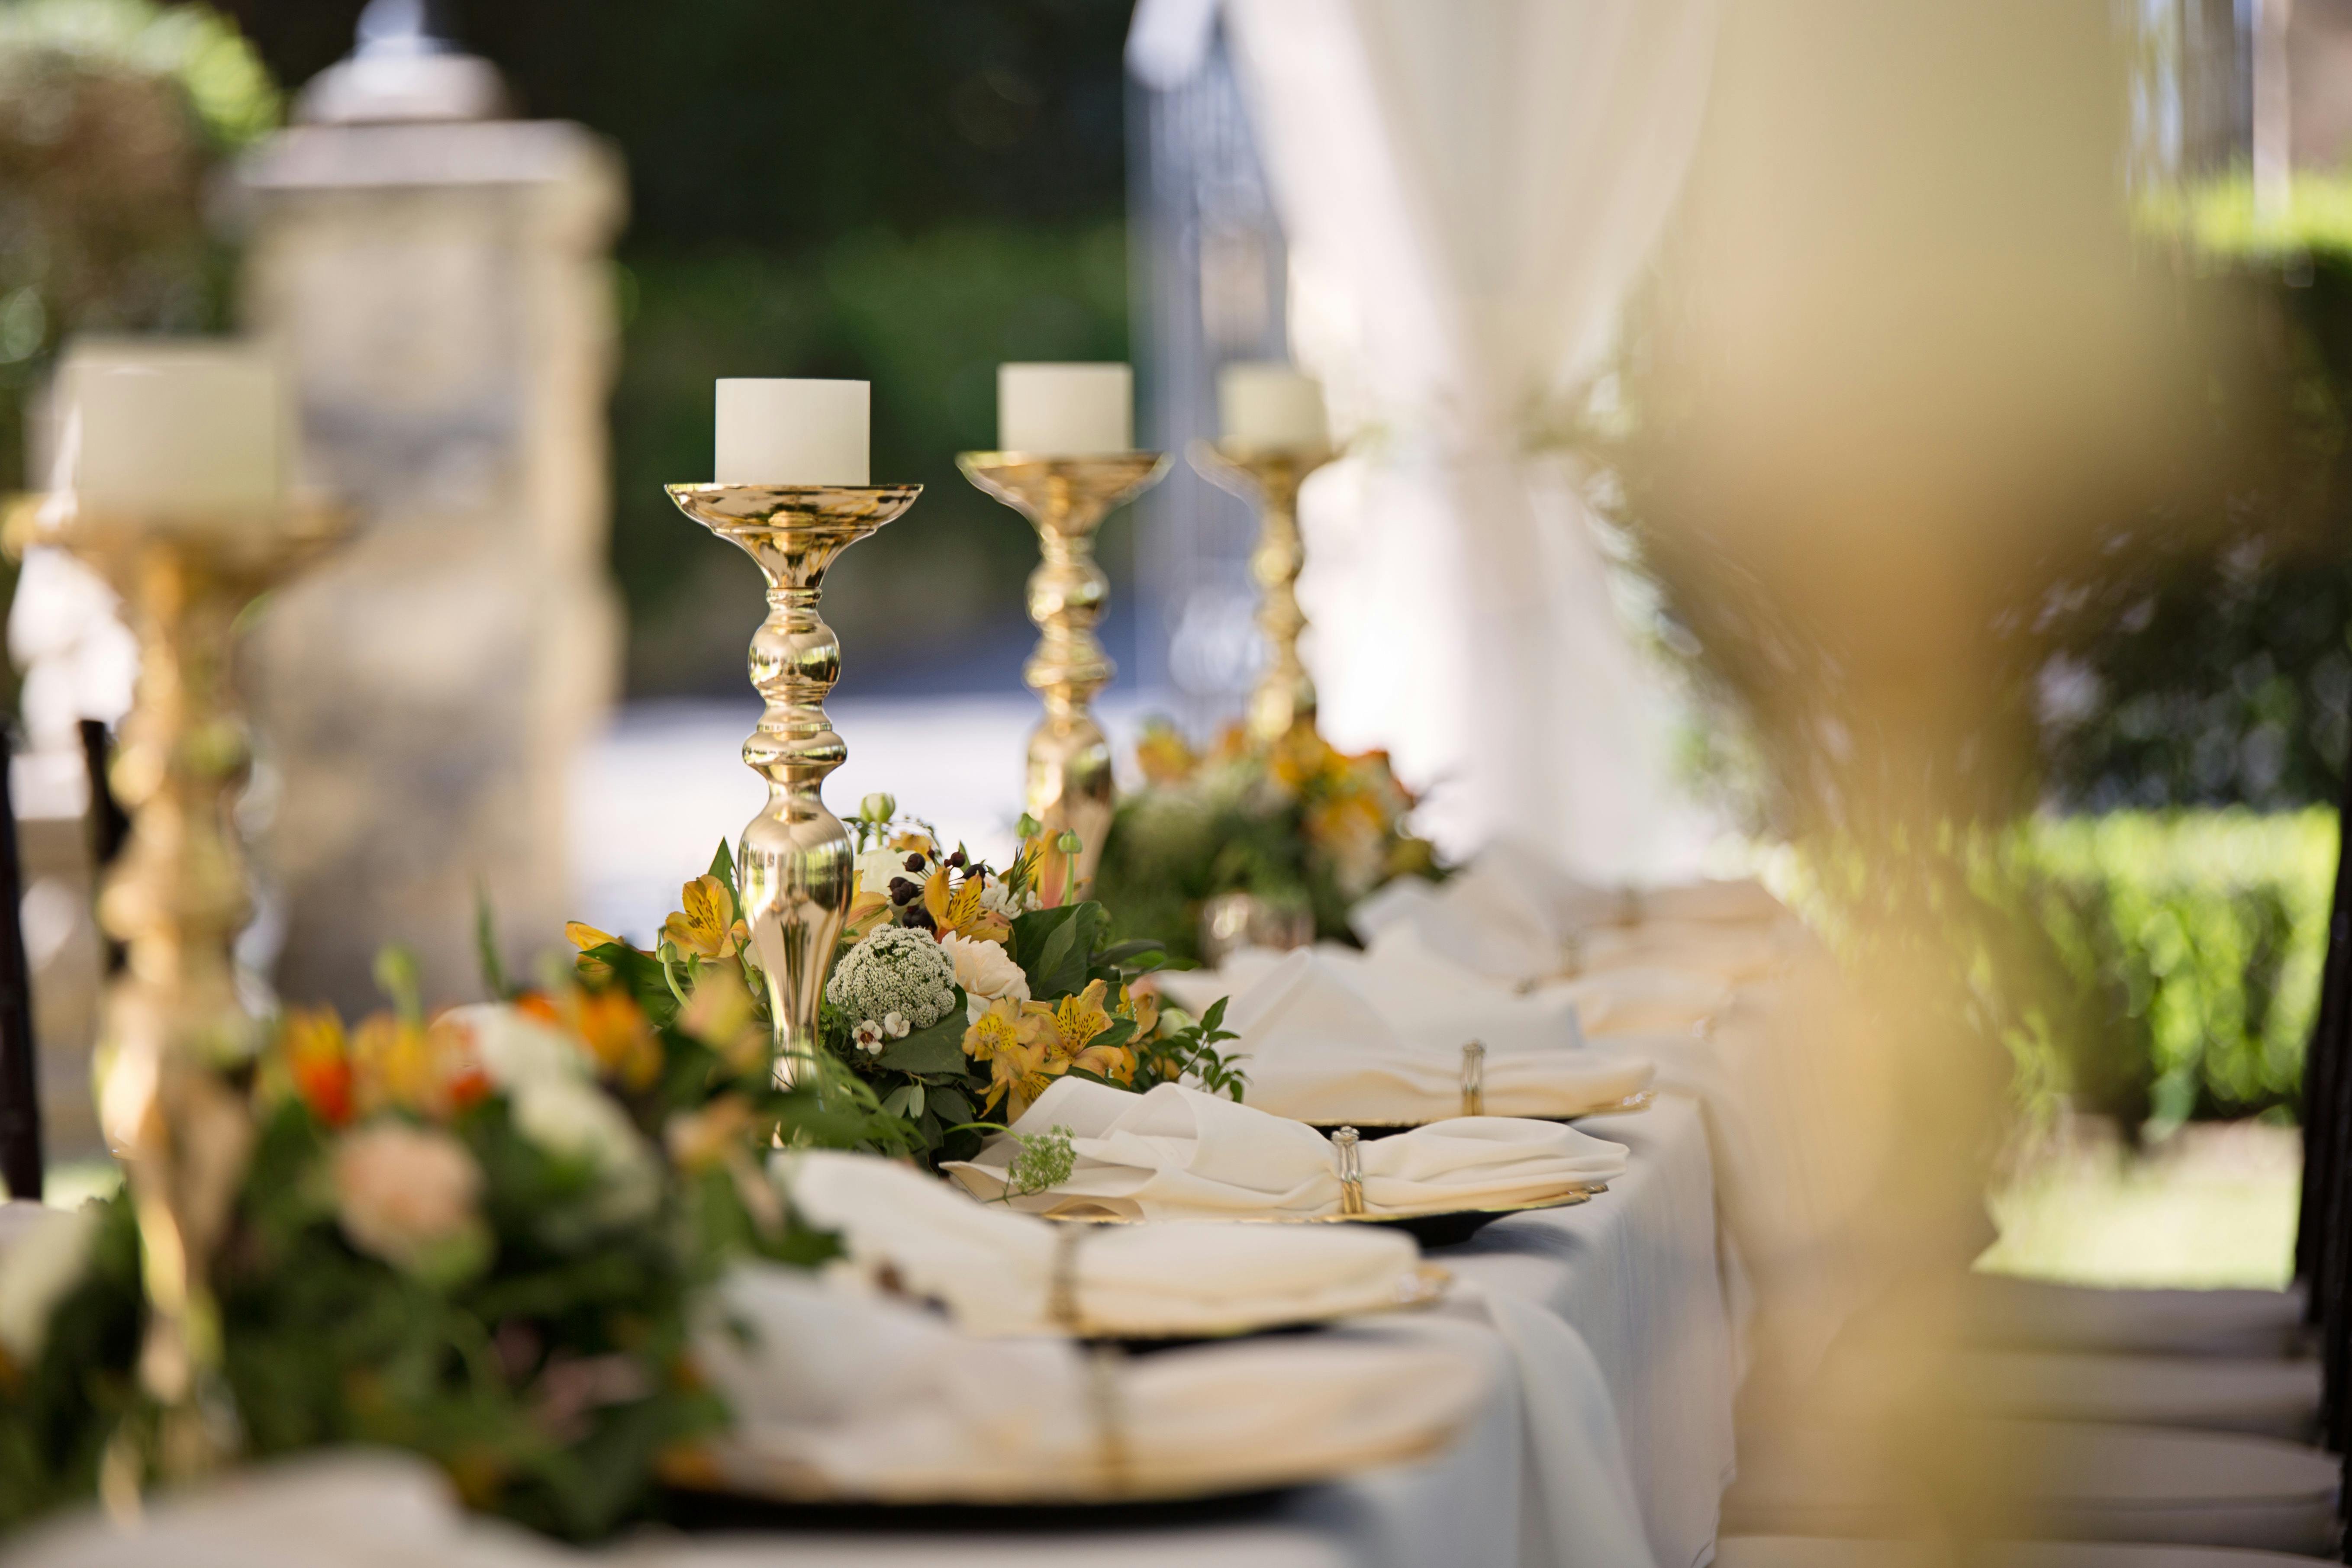 For illustration purposes only. Wedding tables set for the reception | Source: Pexels